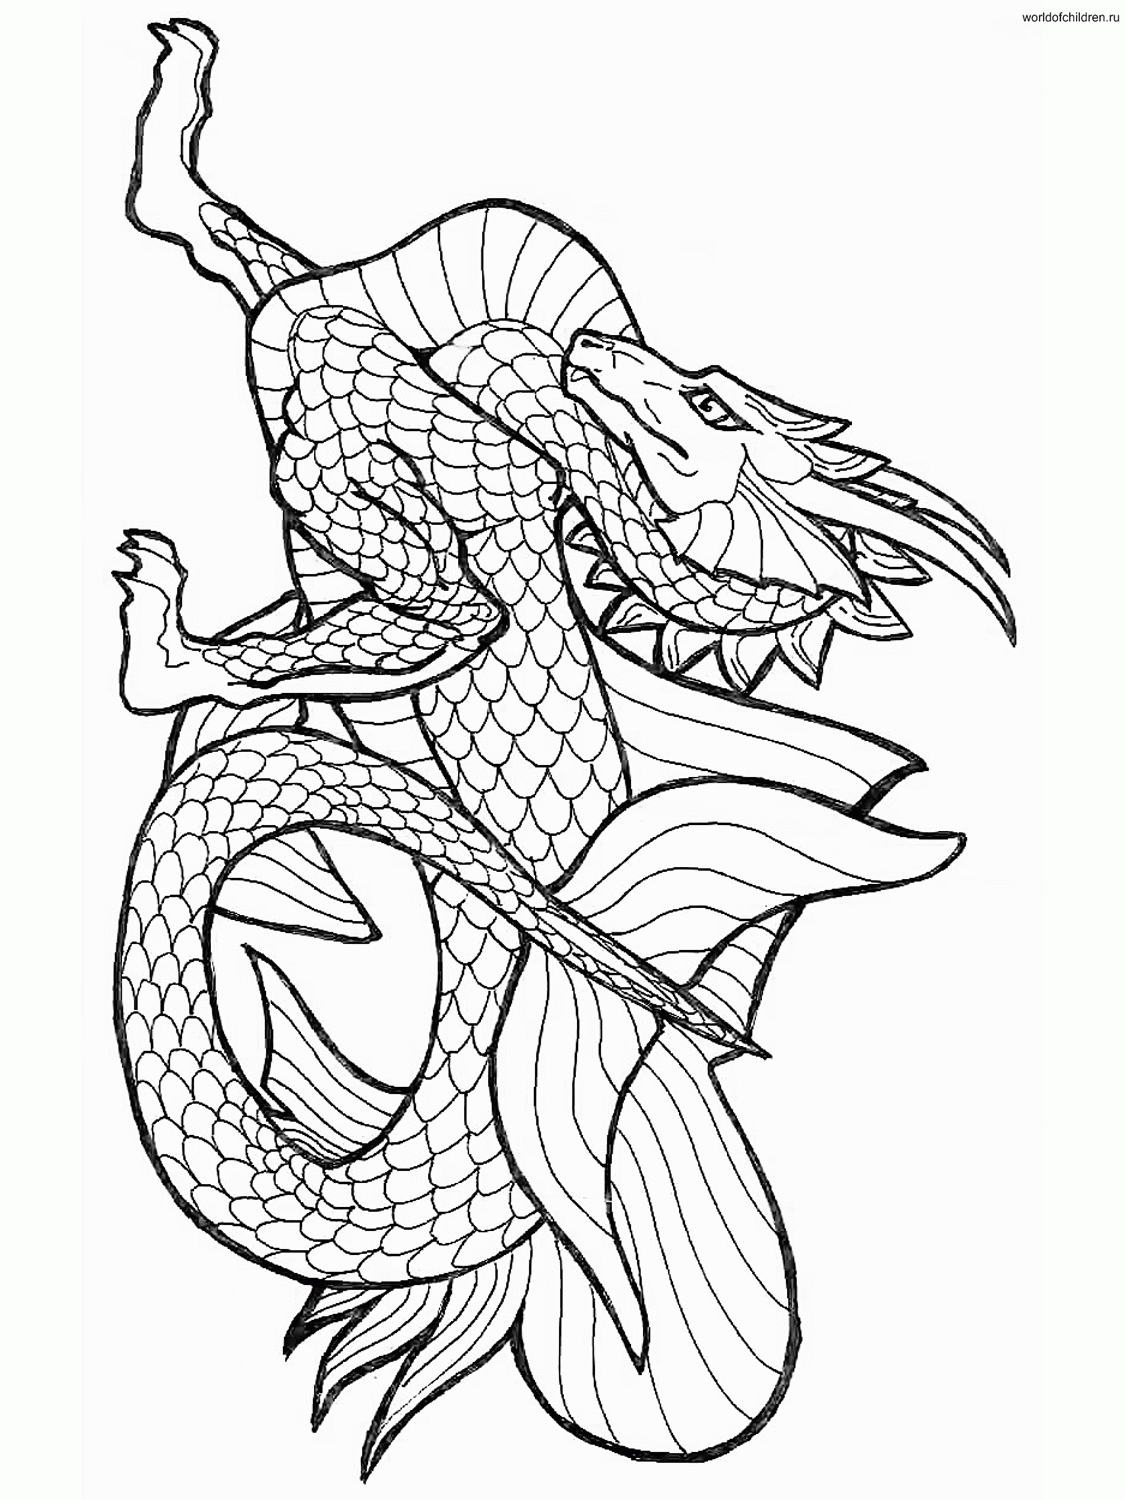 Dragons coloring Page / Dragons / Kids printables coloring pages